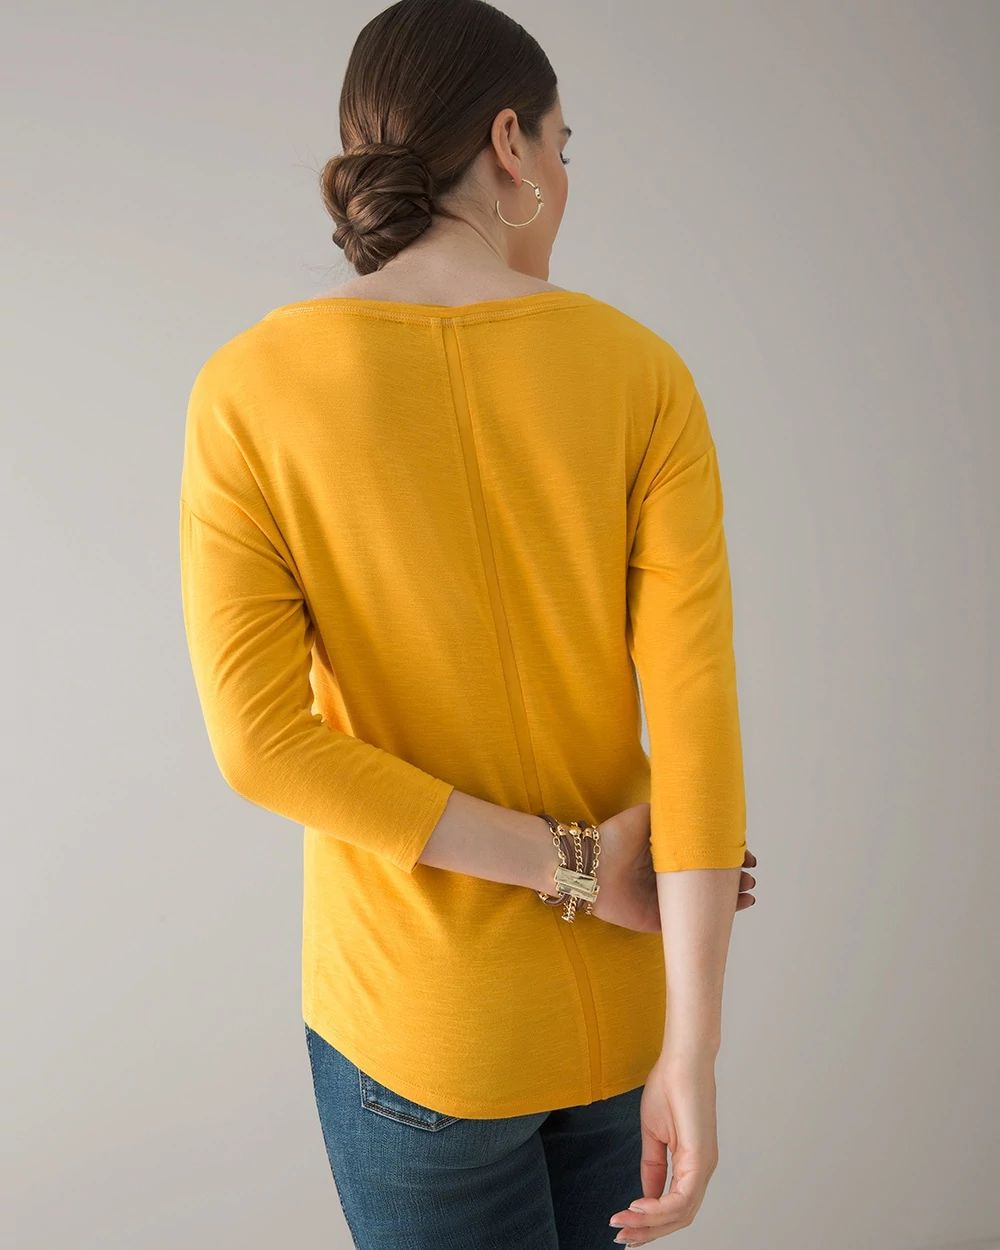 3/4 Sleeve Drop Shoulder Tee click to view larger image.